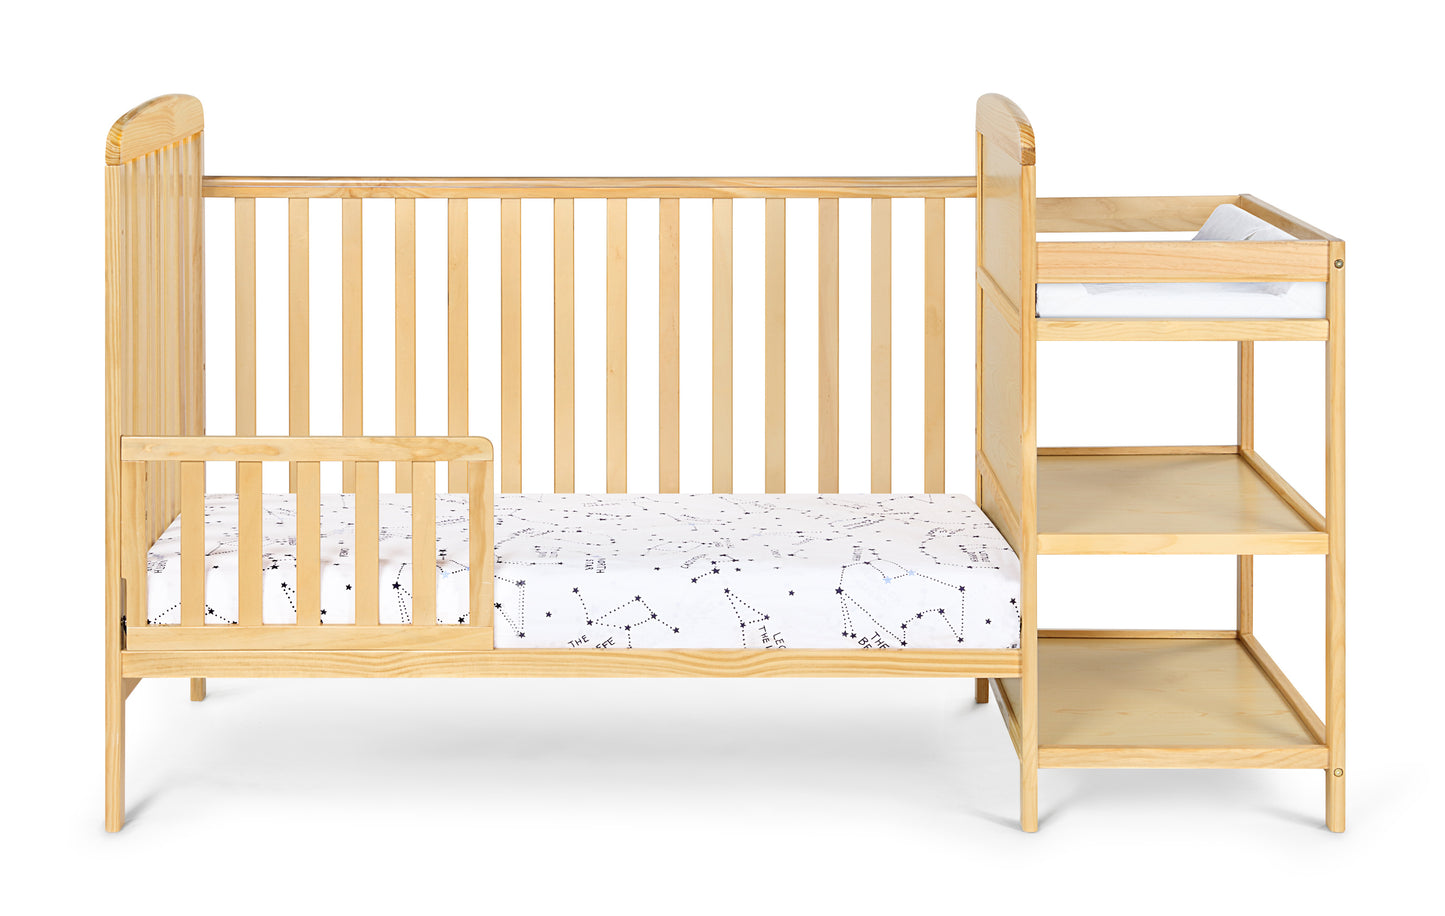 Ramsey 3-in-1 Convertible Crib and Changer Combo Natural